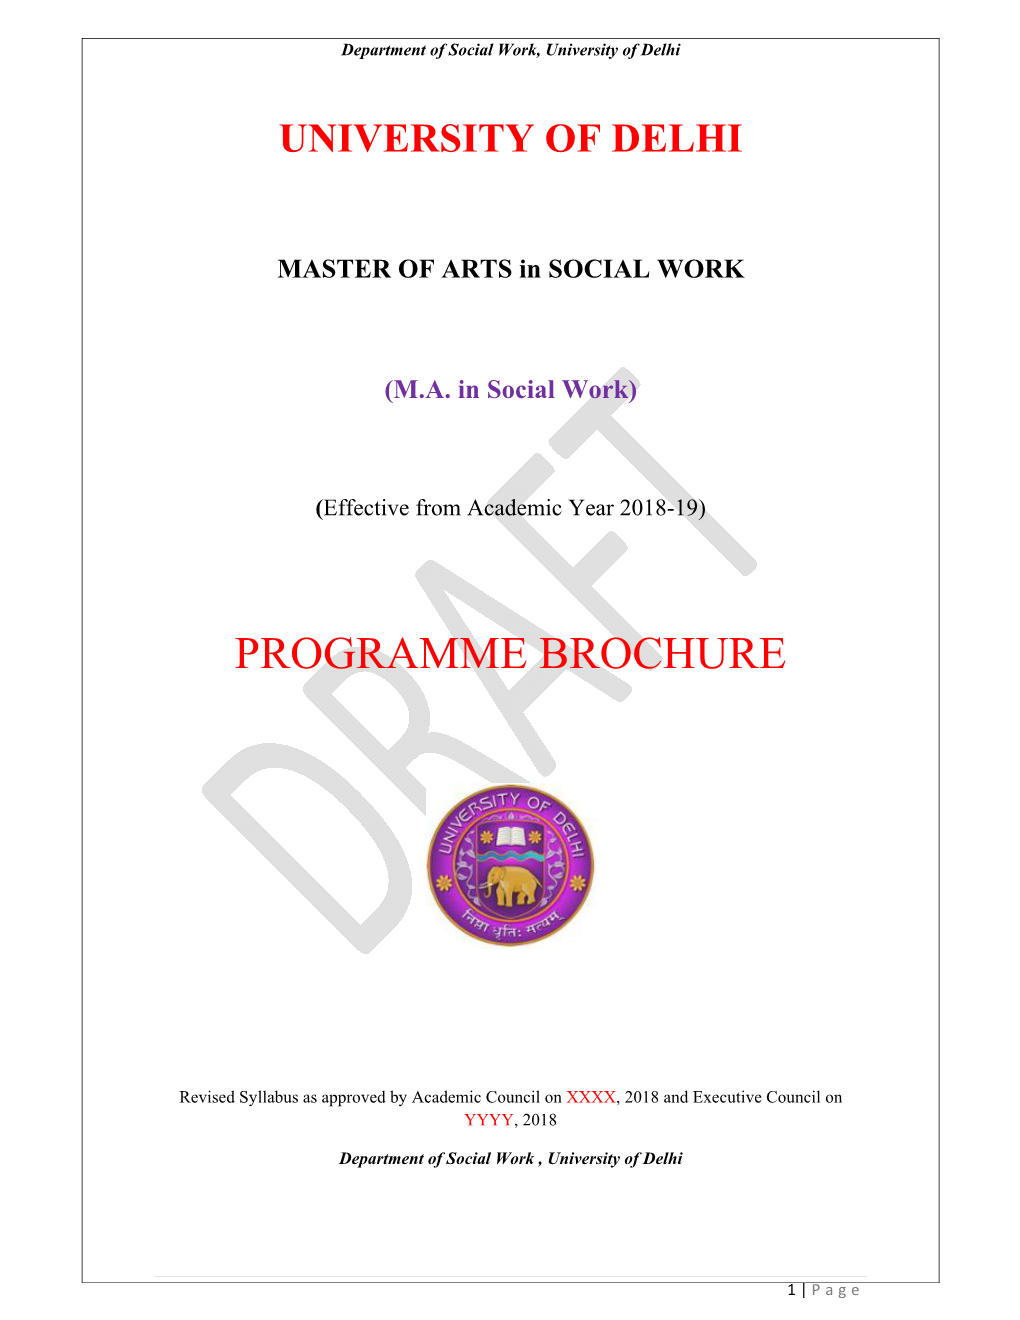 MASTER of ARTS in SOCIAL WORK